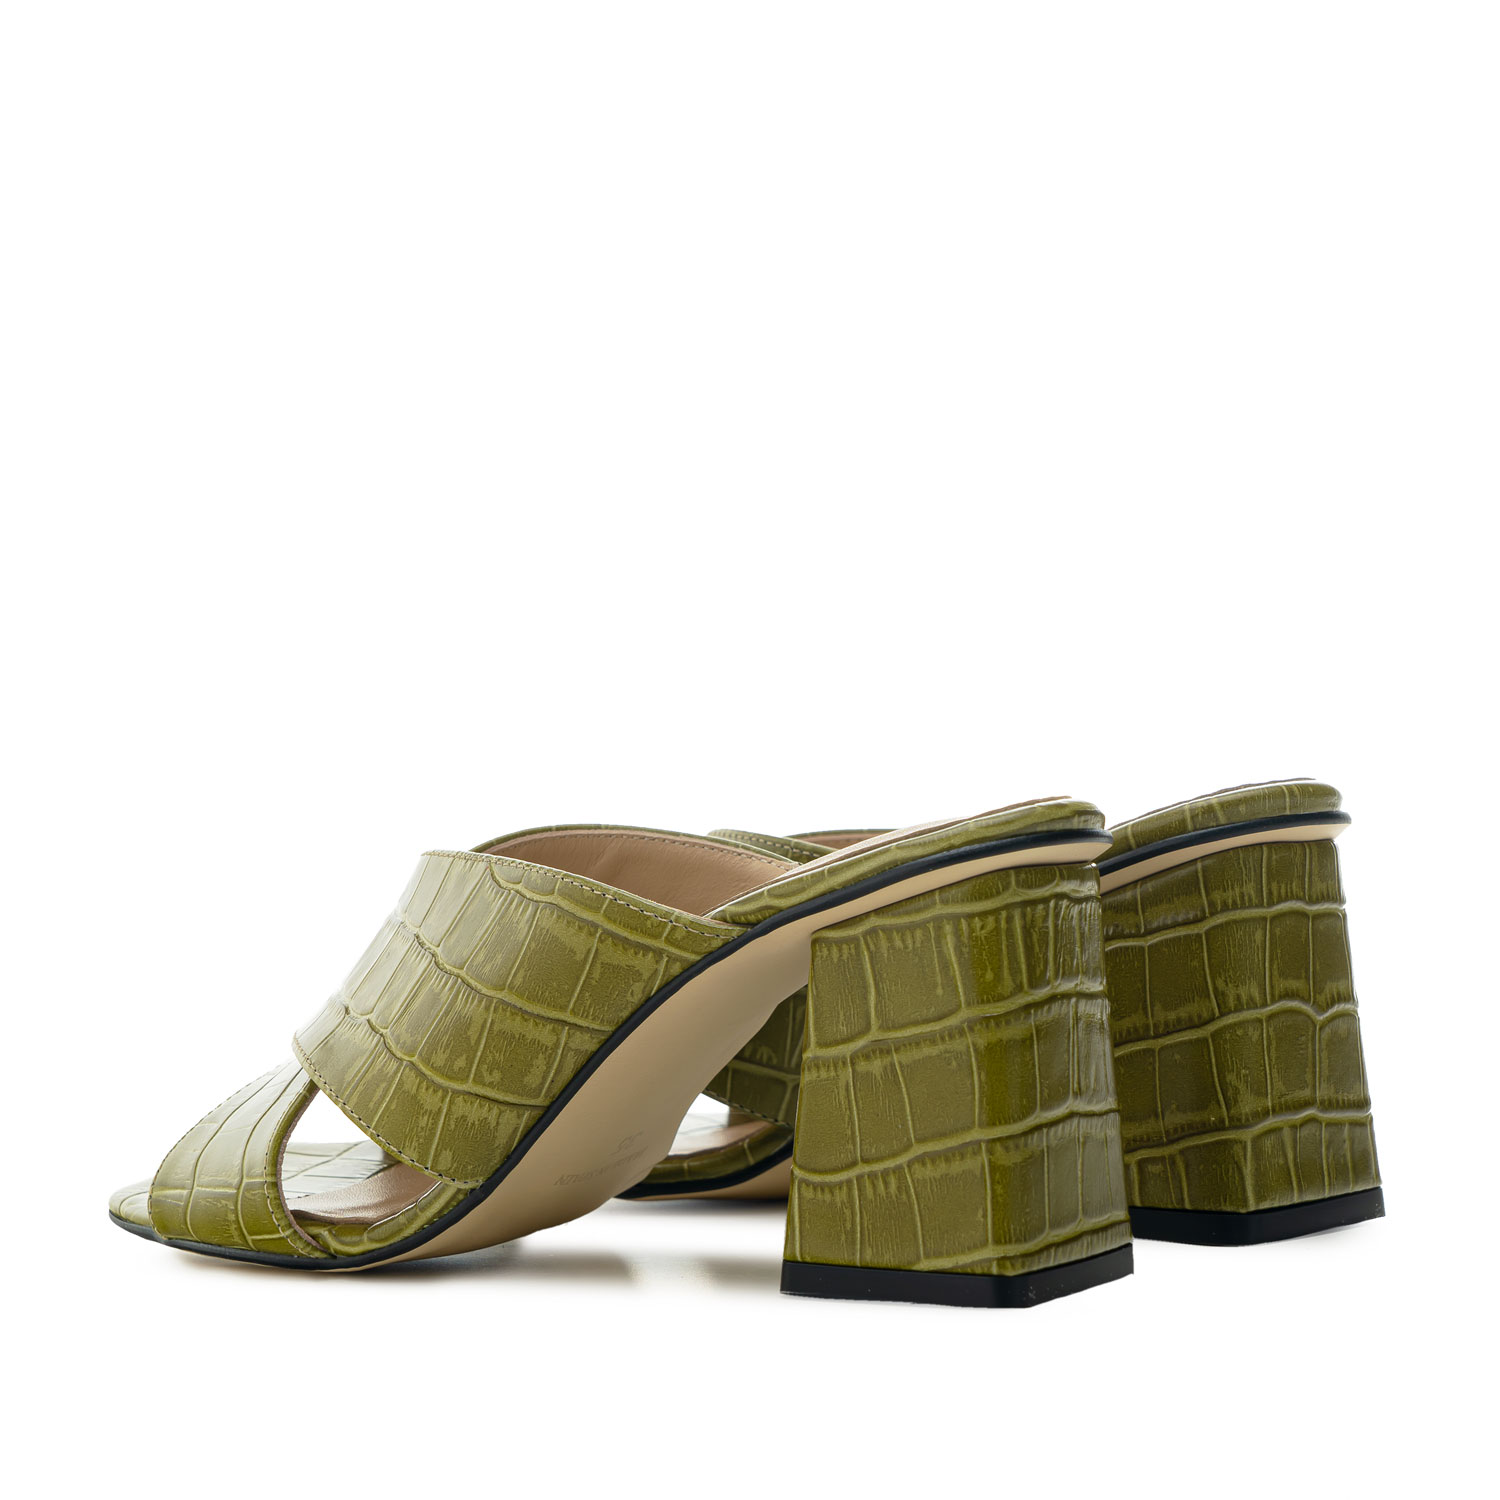 Sandals in Black Olive Green Leather 